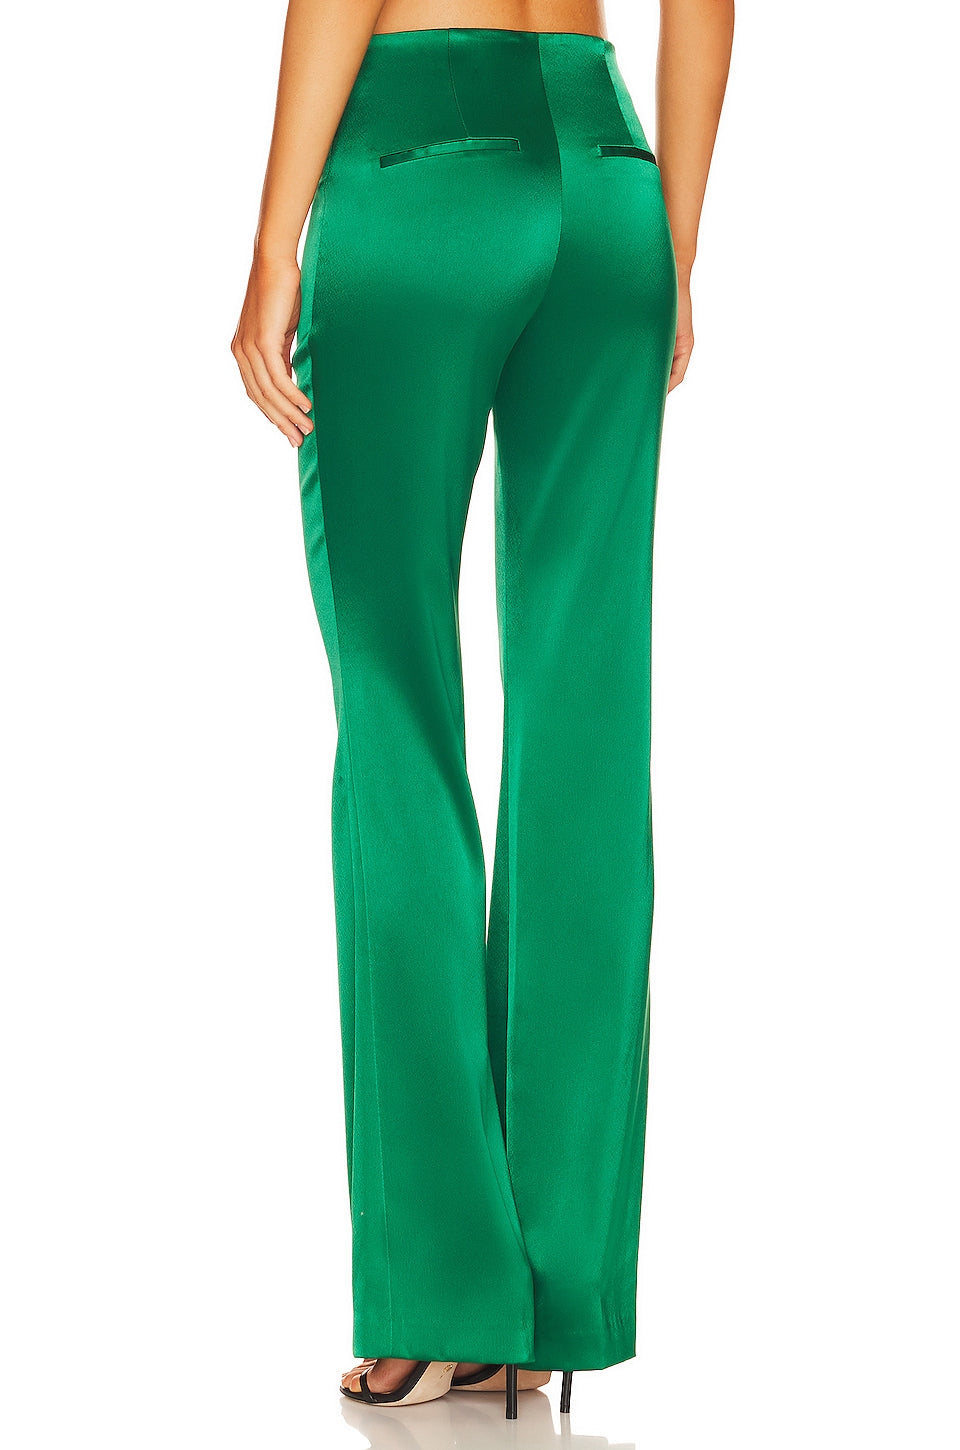 Alice + Olivia Teeny Fit Flare Bootcut Pant in Emerald SIZE MEDIUM